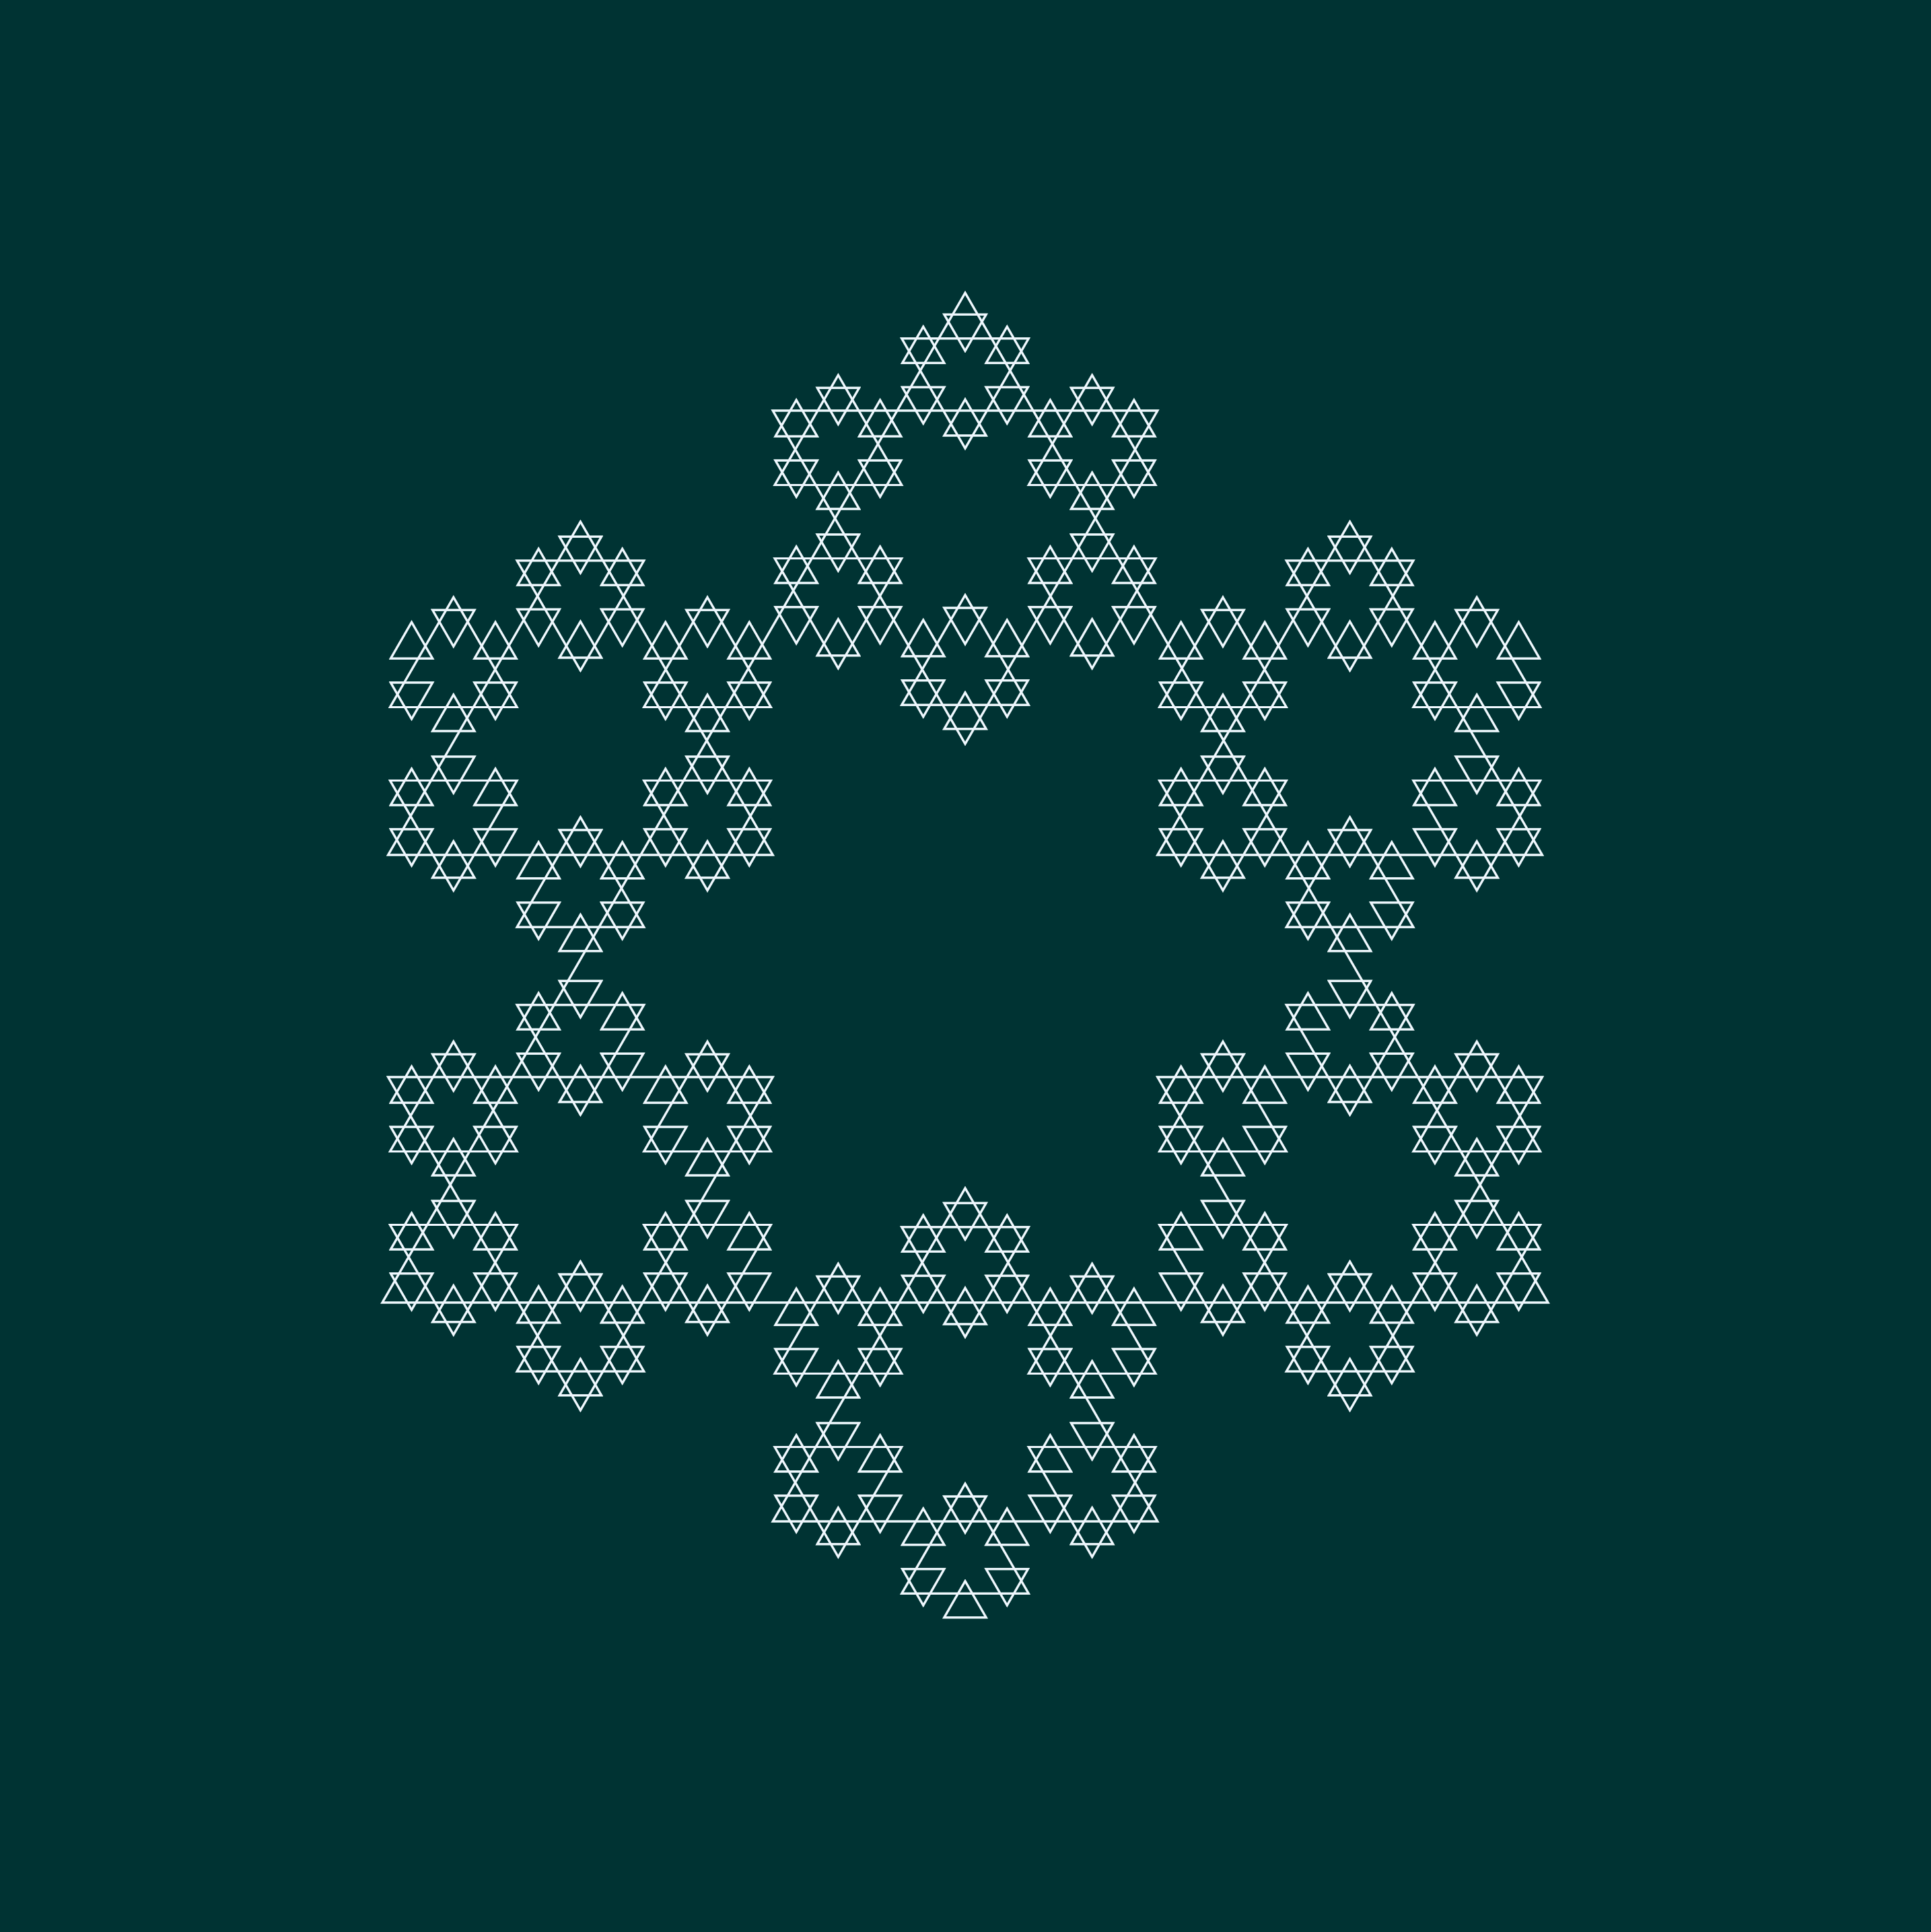 A fractal produced by placing smaller and smaller triangles in a pattern